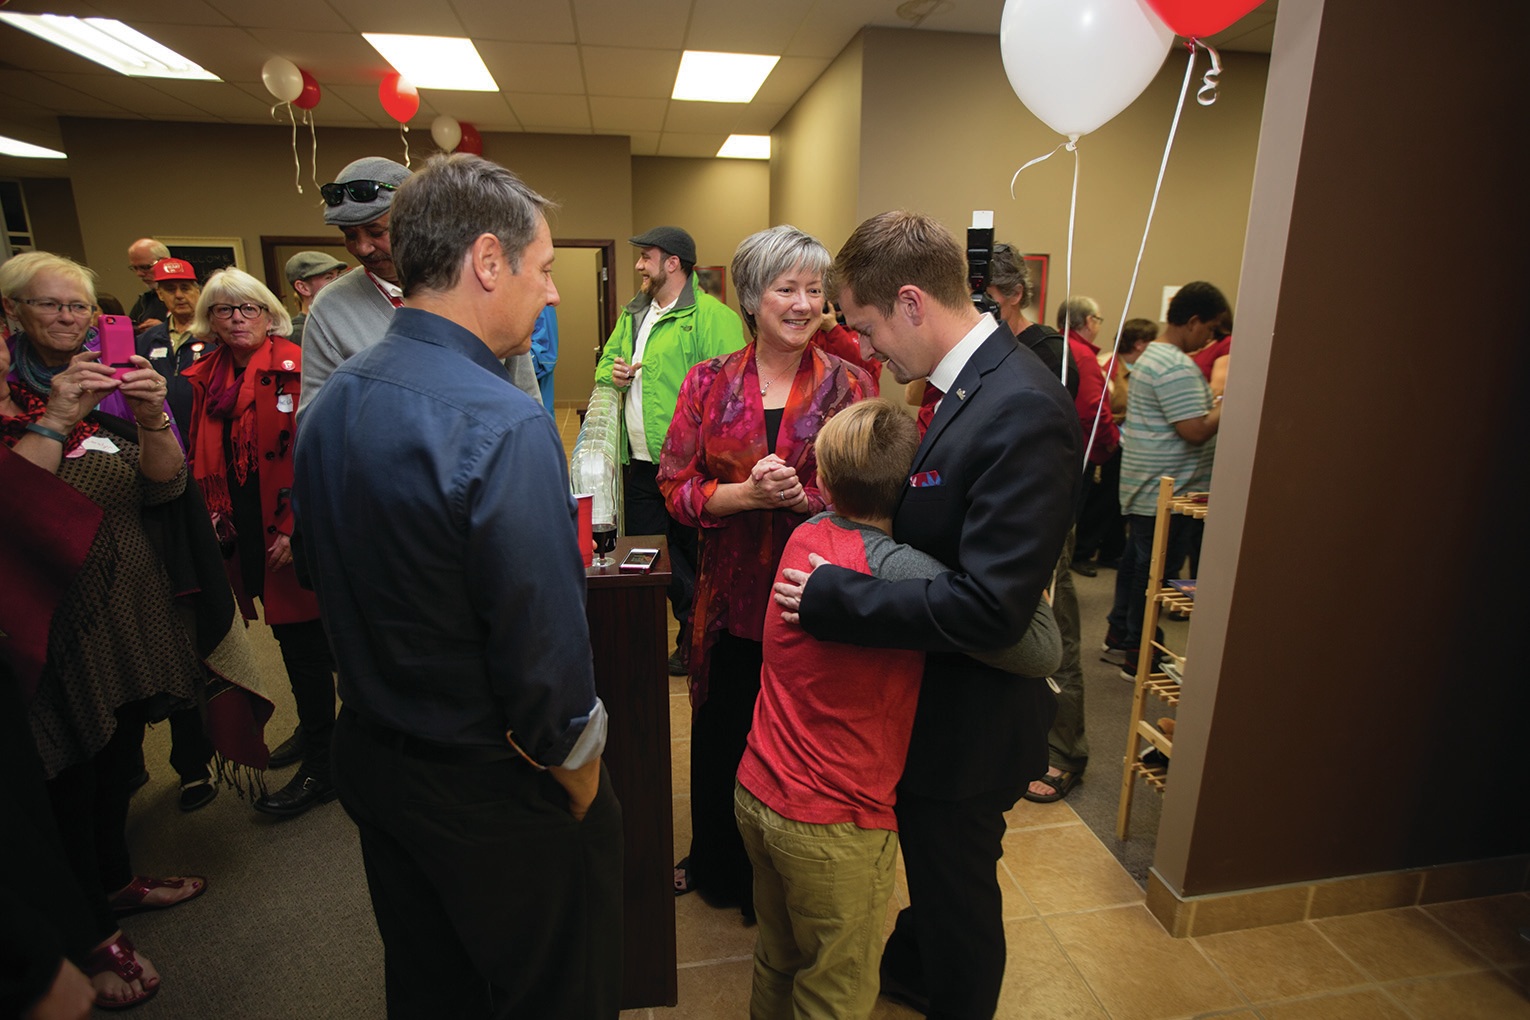 EXCITEMENT - Liberal Party candidate Jeff Rock greeted supporters at his campaign headquarters in Red Deer on Monday. Rock was the candidate for Red Deer-Lacombe.